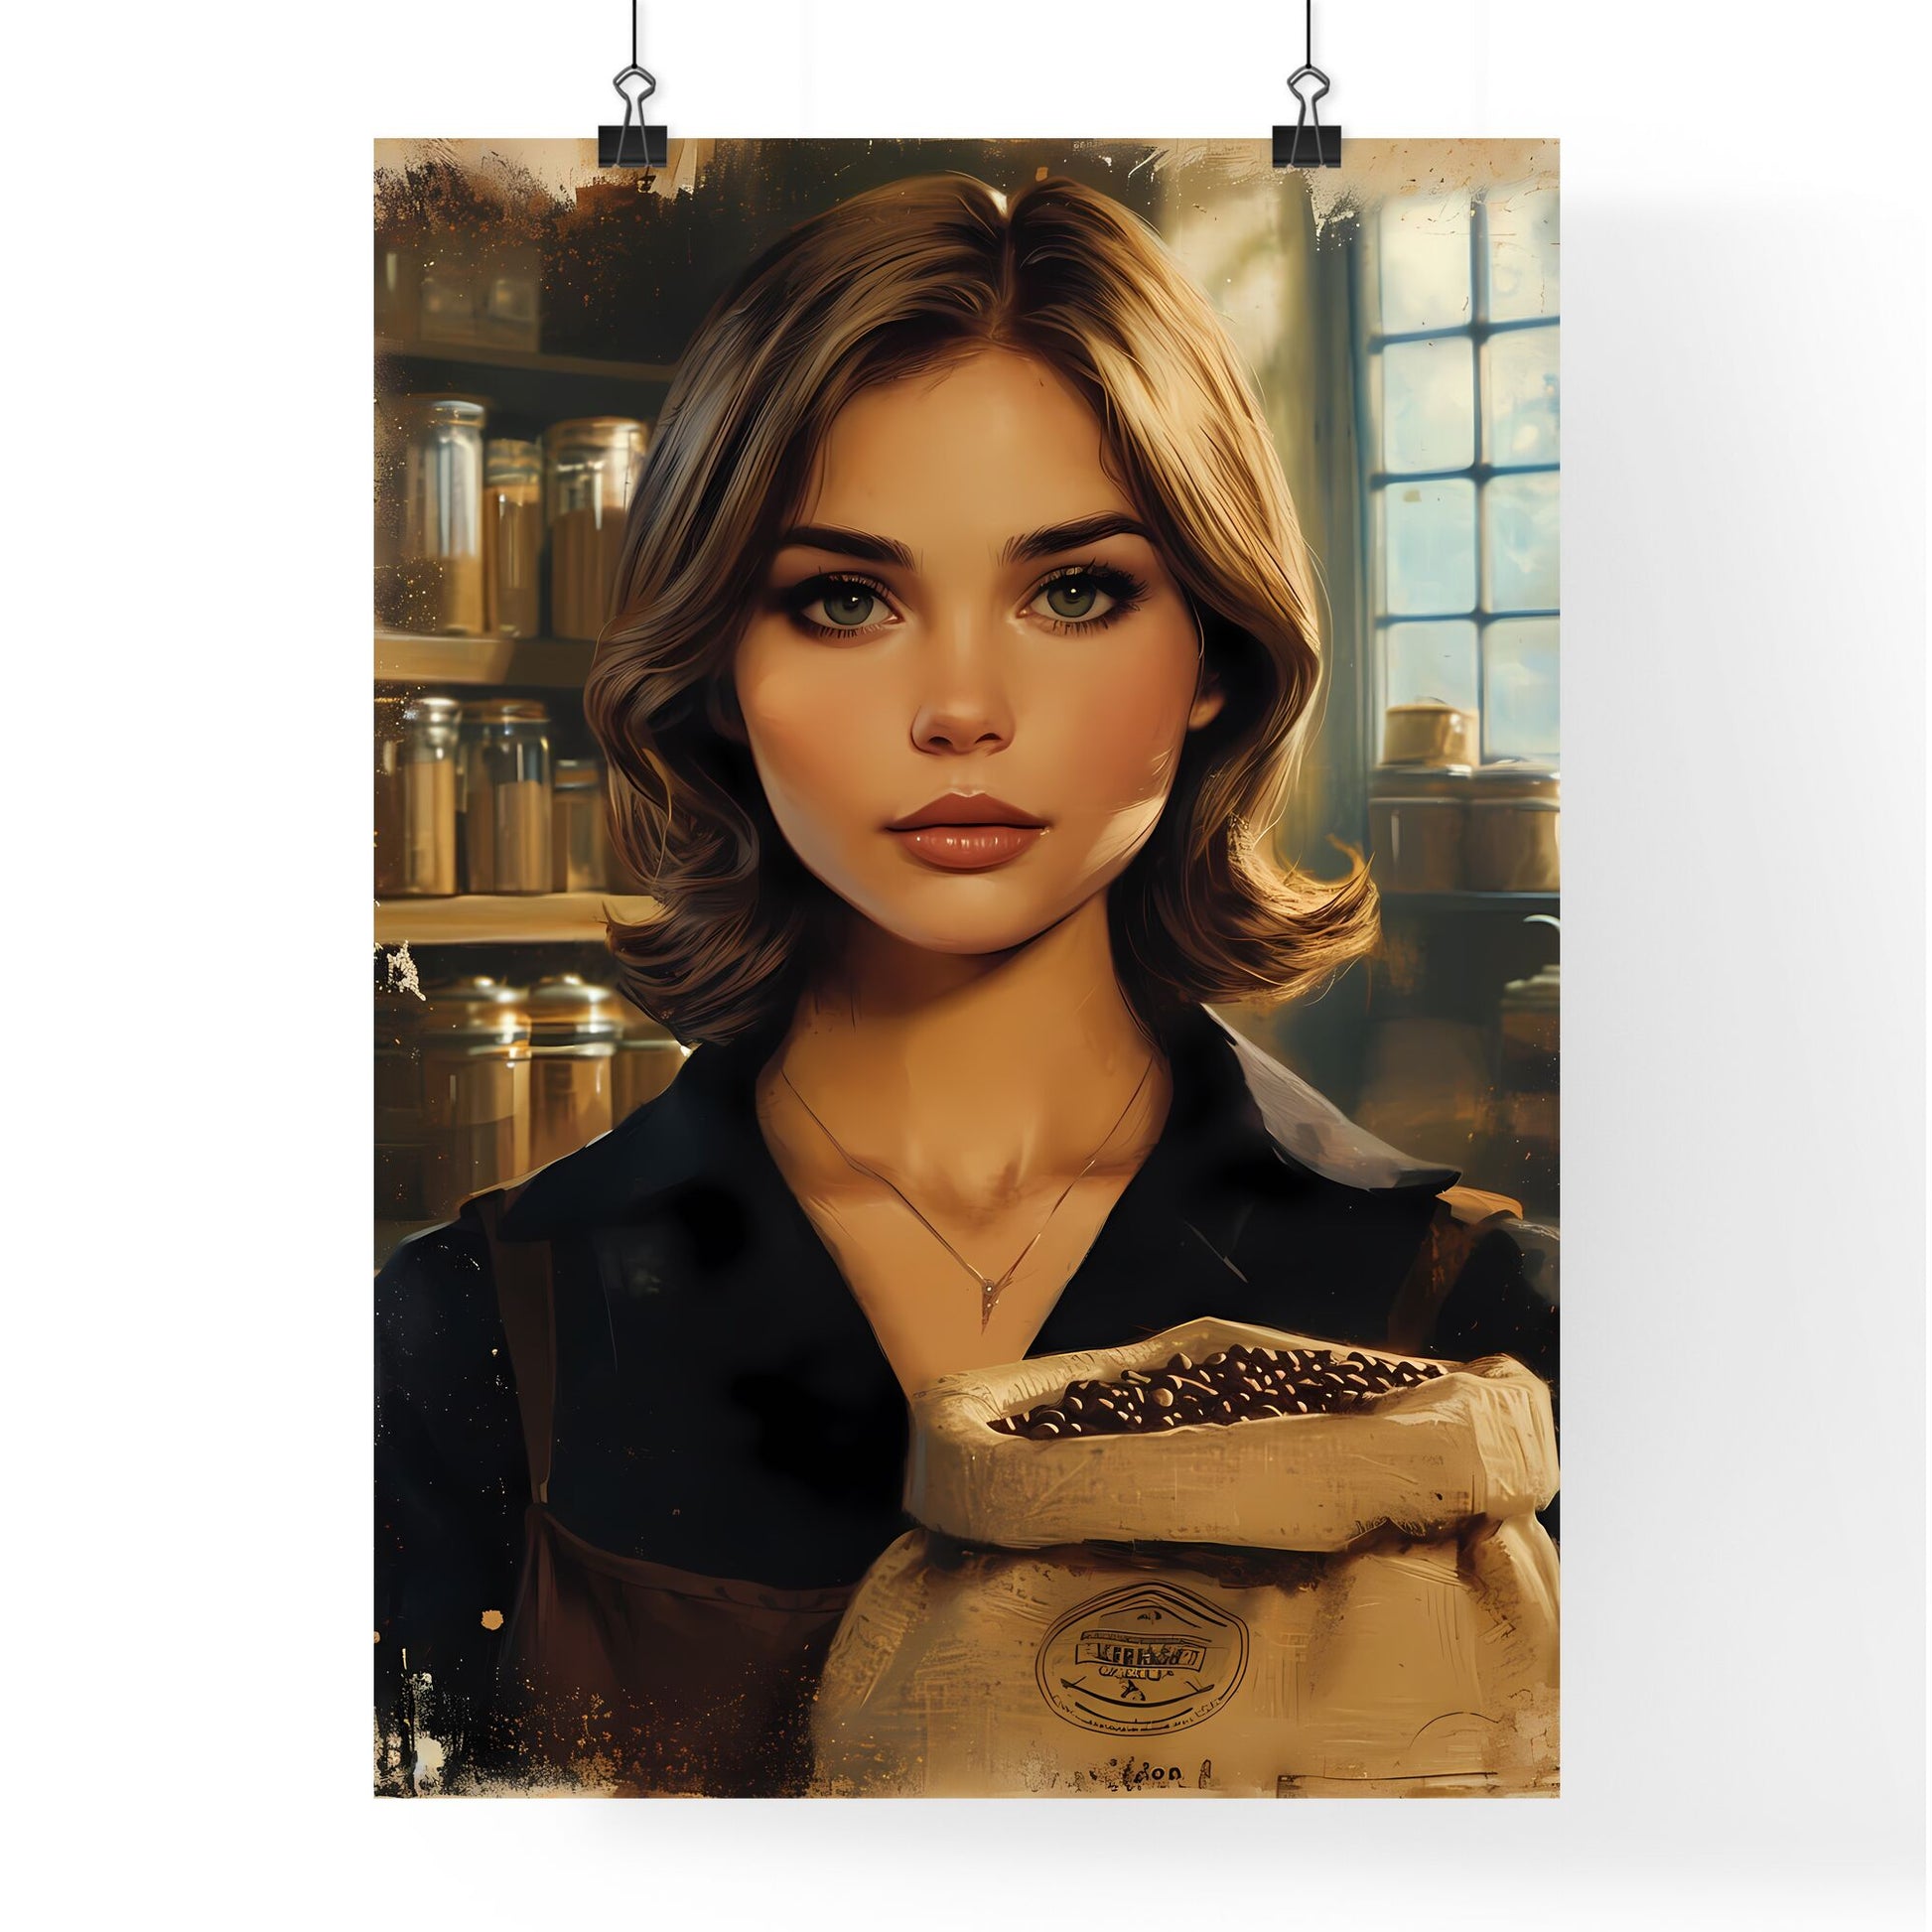 The vintage pin up Coffee girl isolated on white - Art print of a woman holding a bag of coffee beans Default Title